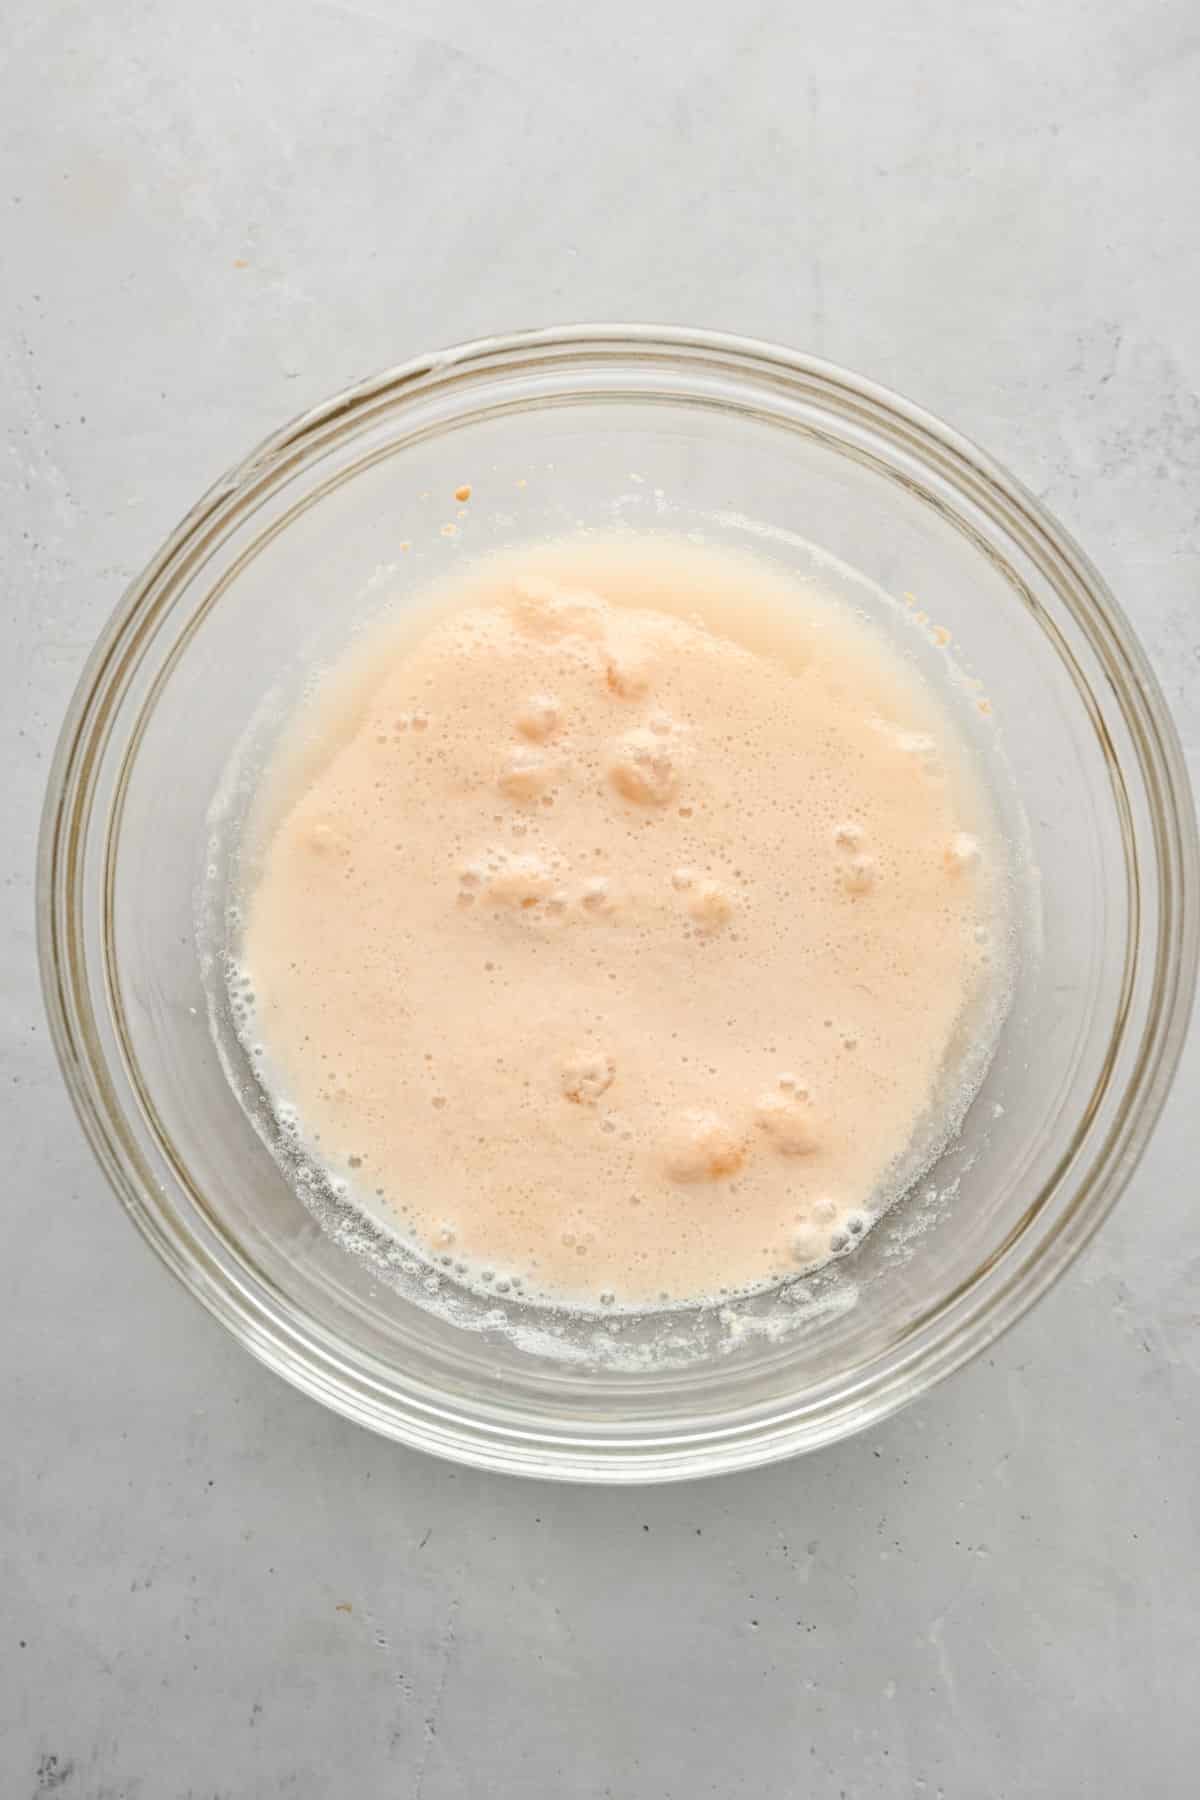 Yeast proofing in a glass mixing bowl. 